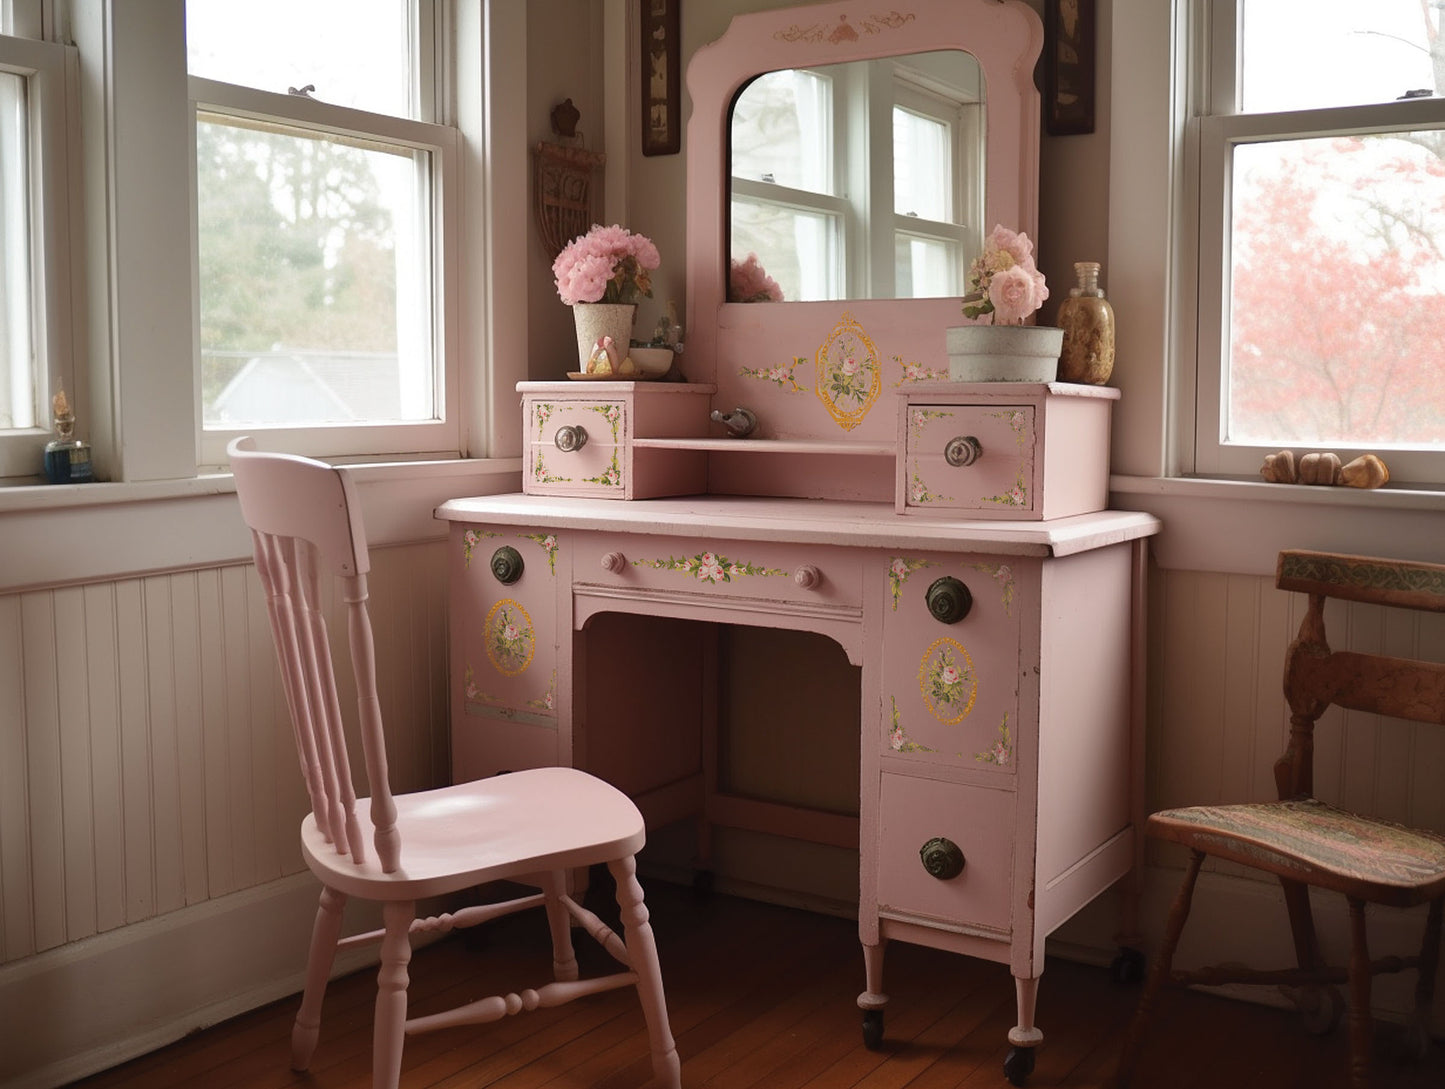 Iron Orchid Designs Petite Fleur Pink | IOD Paint Inlay